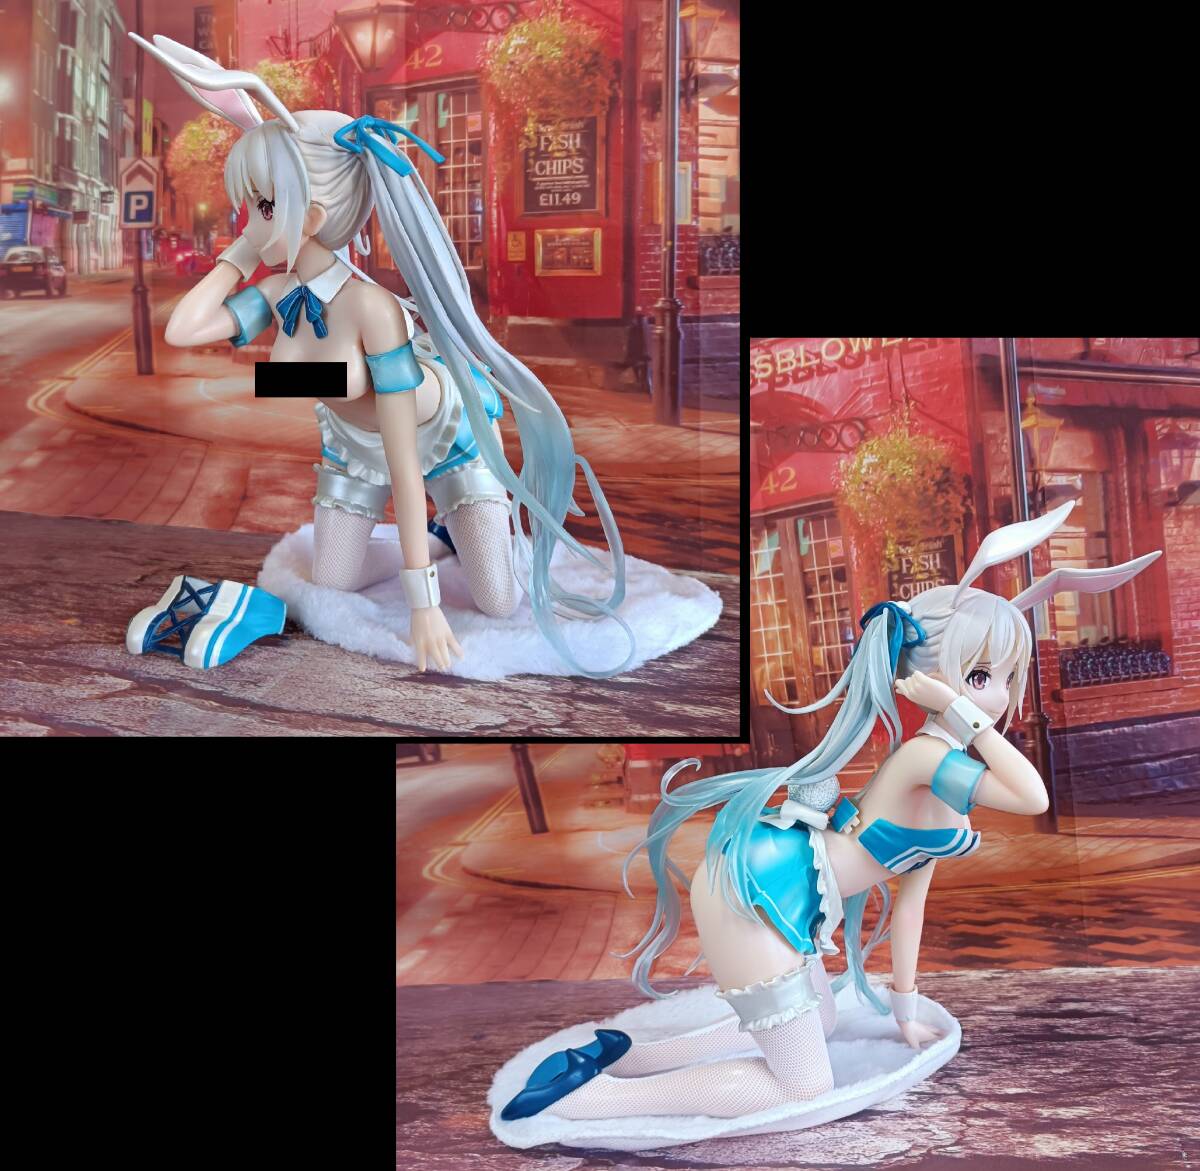 Chris-Aqua blue Chris [1/4 scale figure ] outer box none # free shipping * anonymity delivery # new goods arrival * inspection goods * photographing only #0410